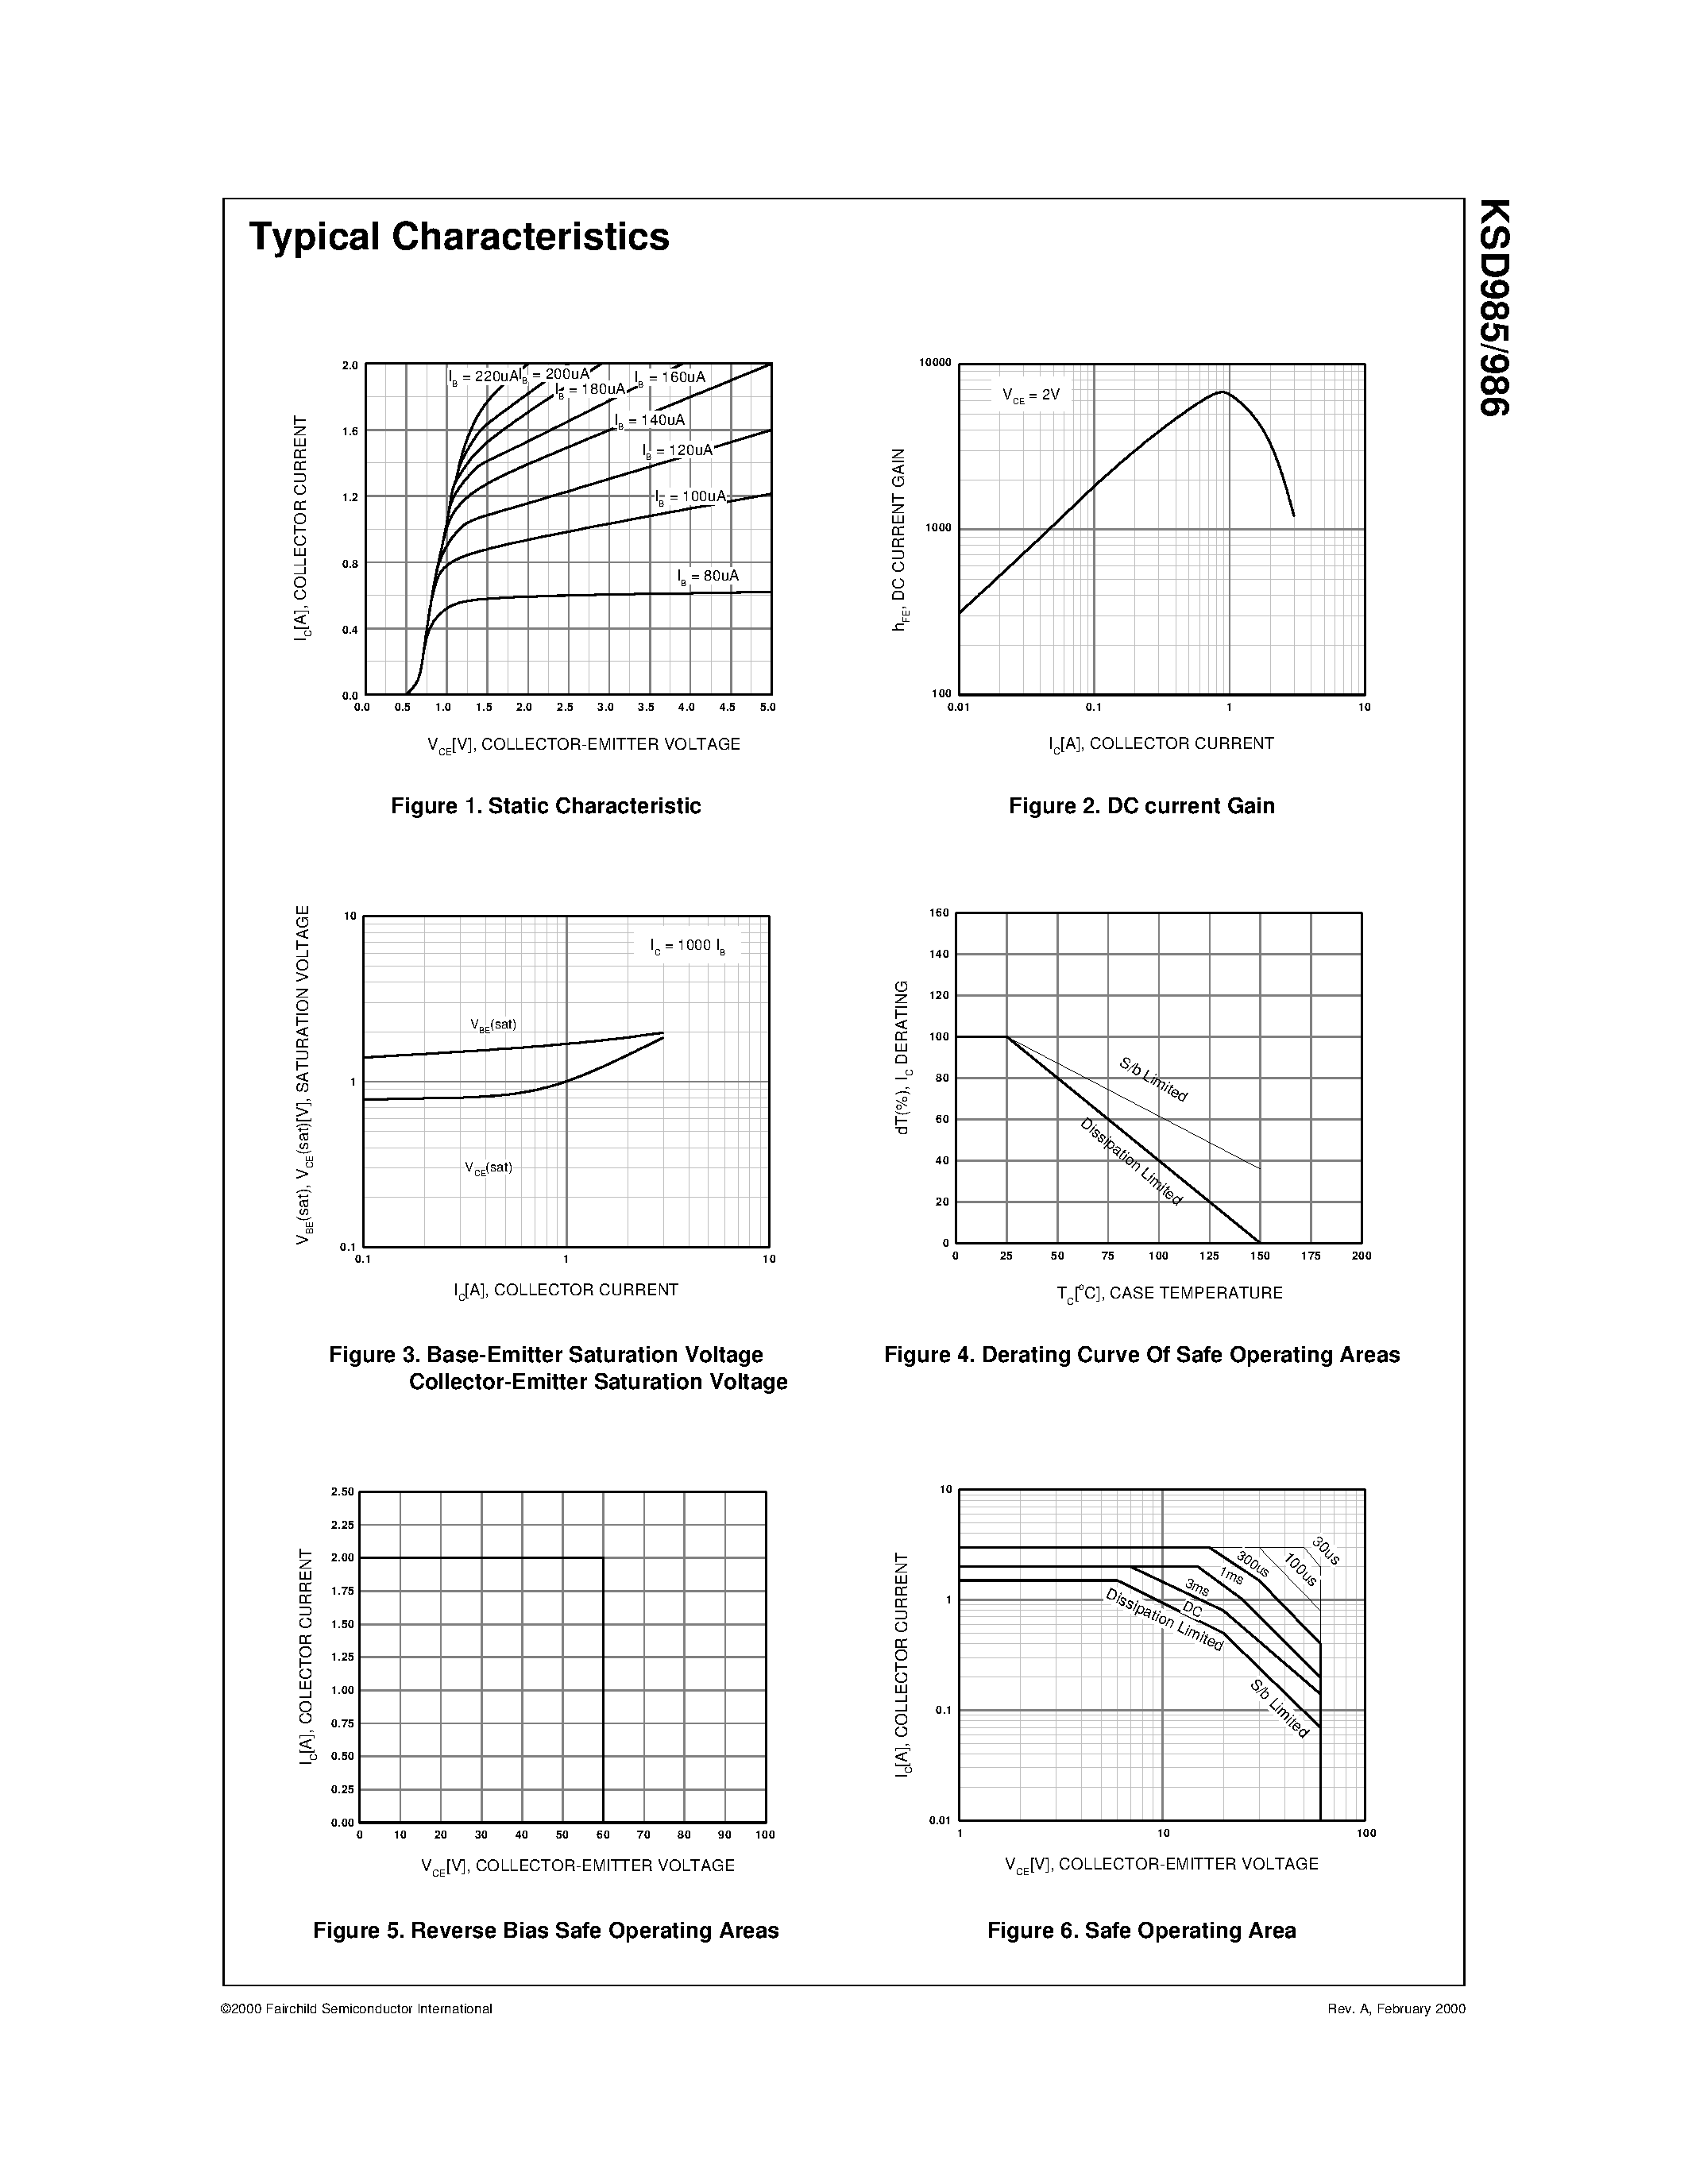 Datasheet KSD985 - Audio Frequency Power Amplifier page 2